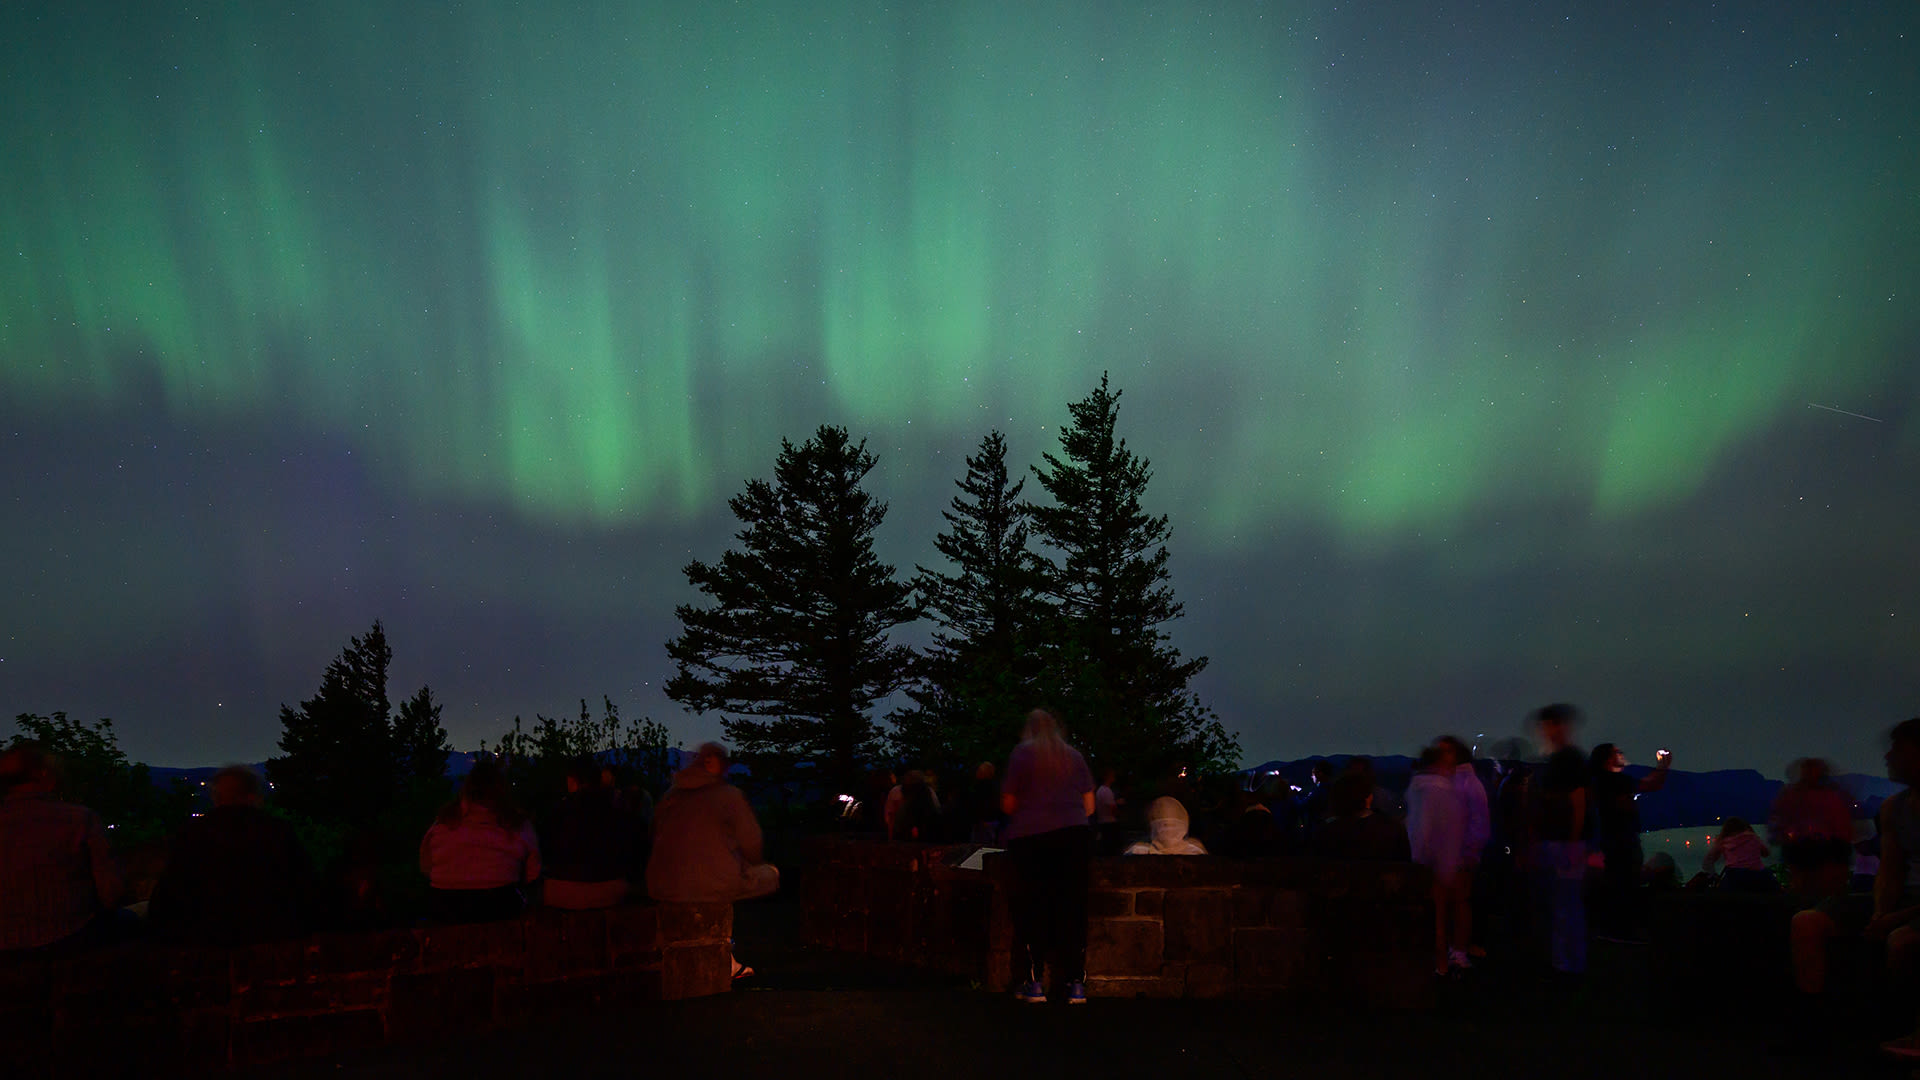 Americans can see Northern Lights aurora tonight - maps show best spots